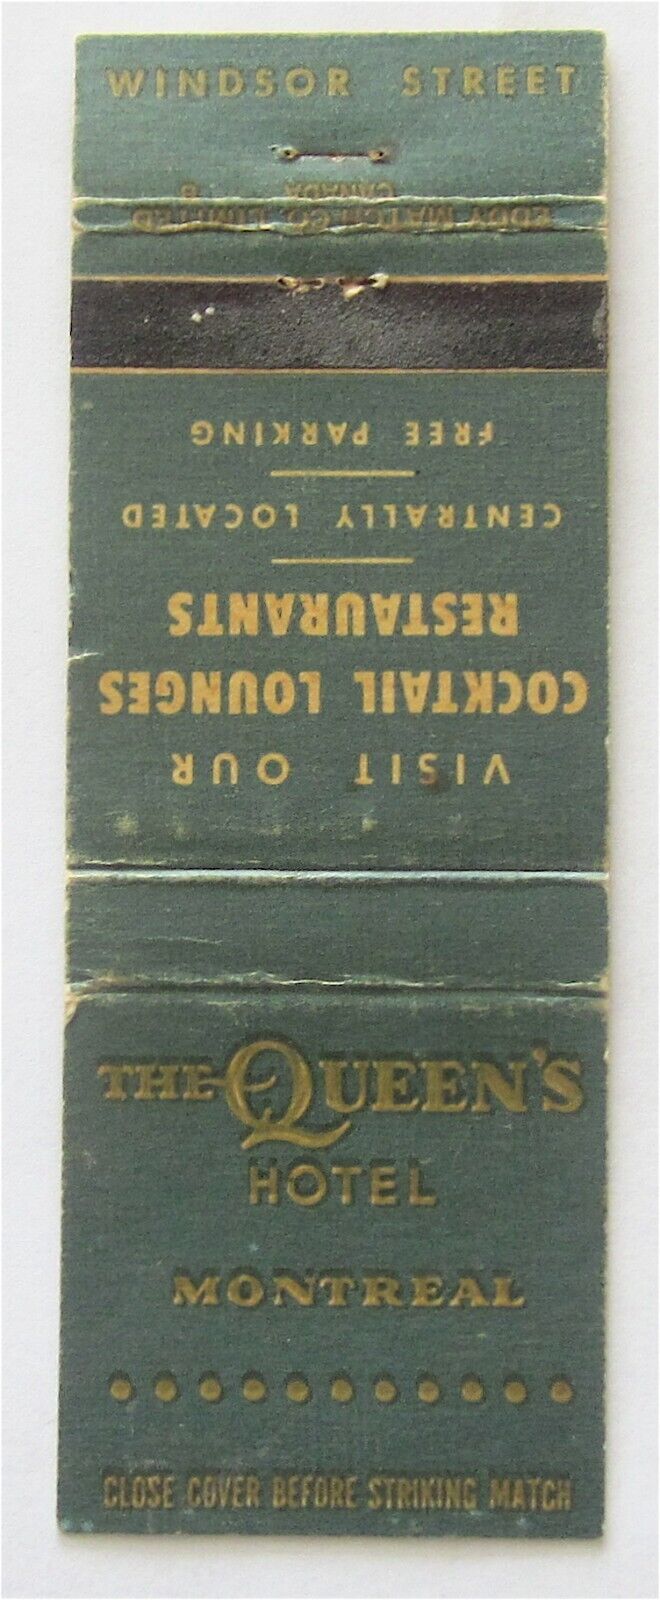 THE QUEEN\'S HOTEL, WINDSOR ST., MONTREAL, QUEBEC, CANADA MATCHBOOK COVER